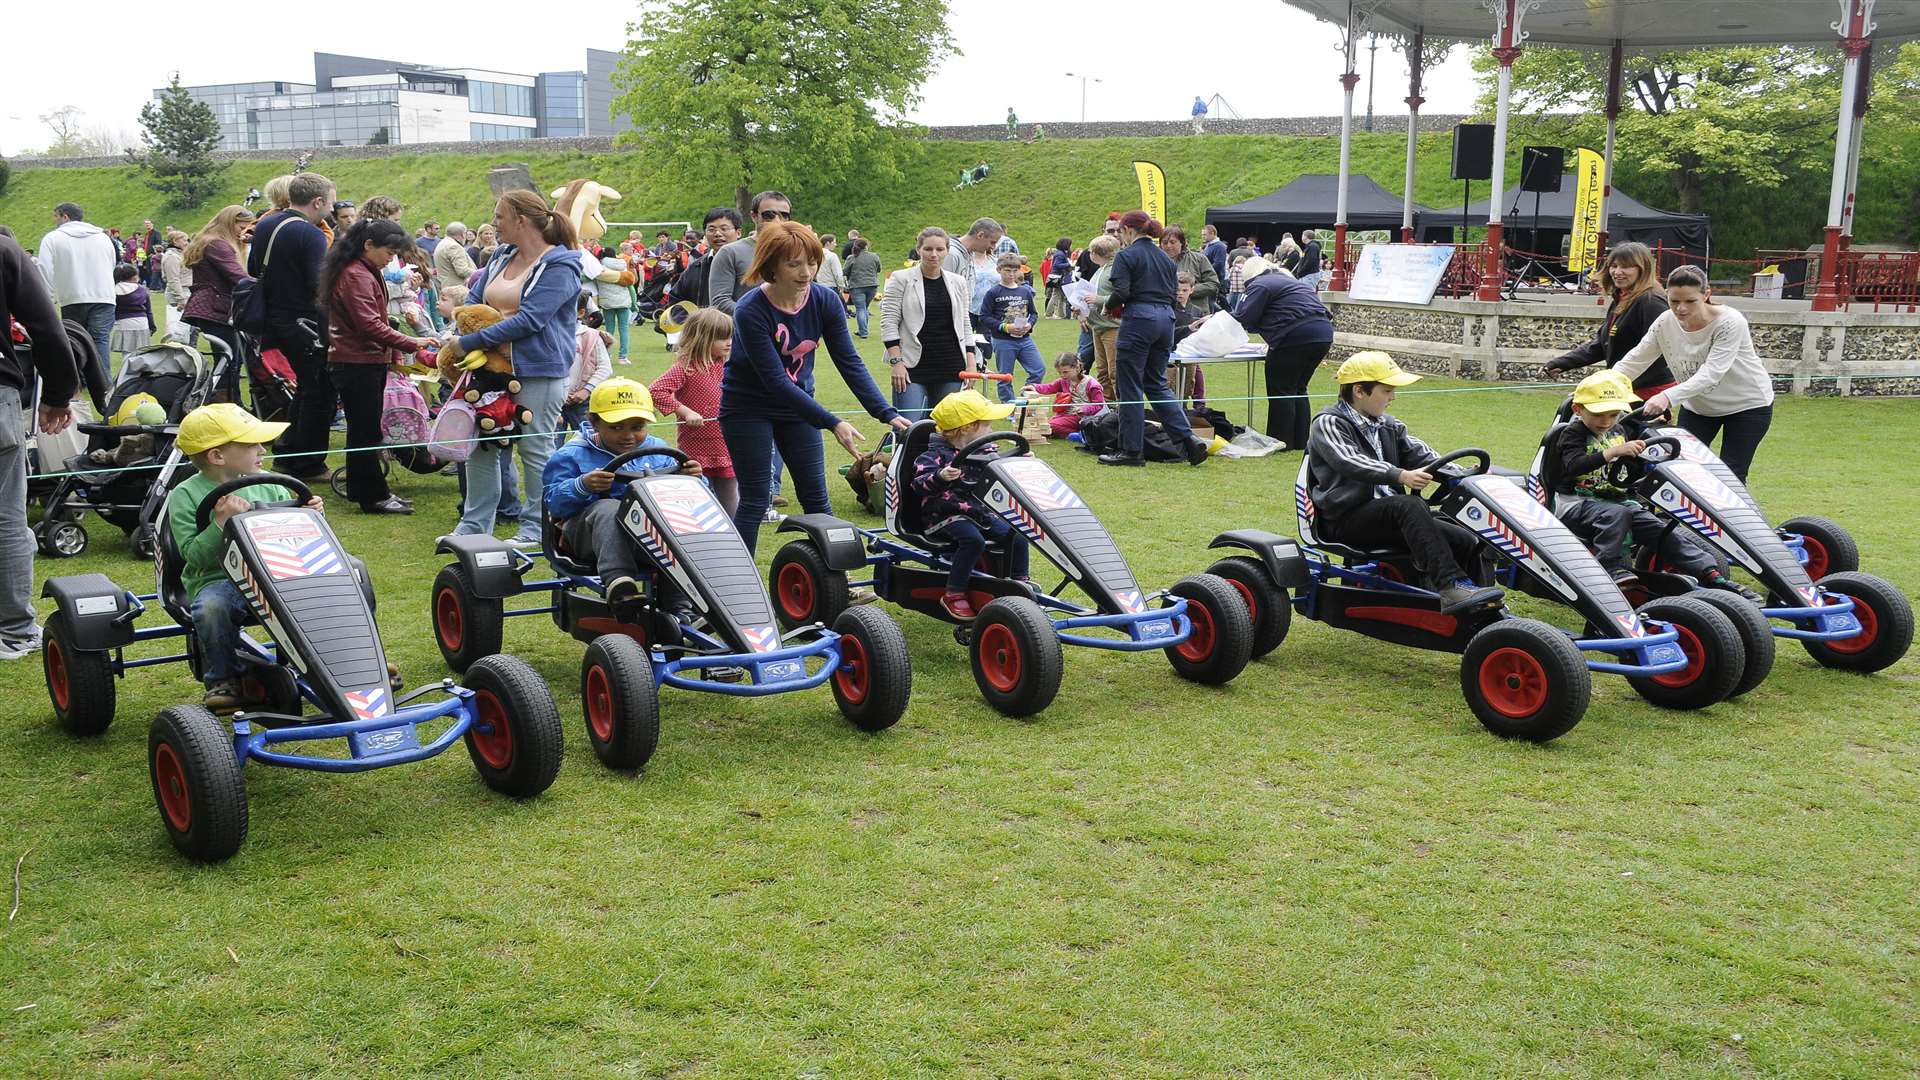 Pedal go-karts are a popular activity at the KM Walk to School mini festival Buster's Big Bash at Canterbury's Dane John Gardens.